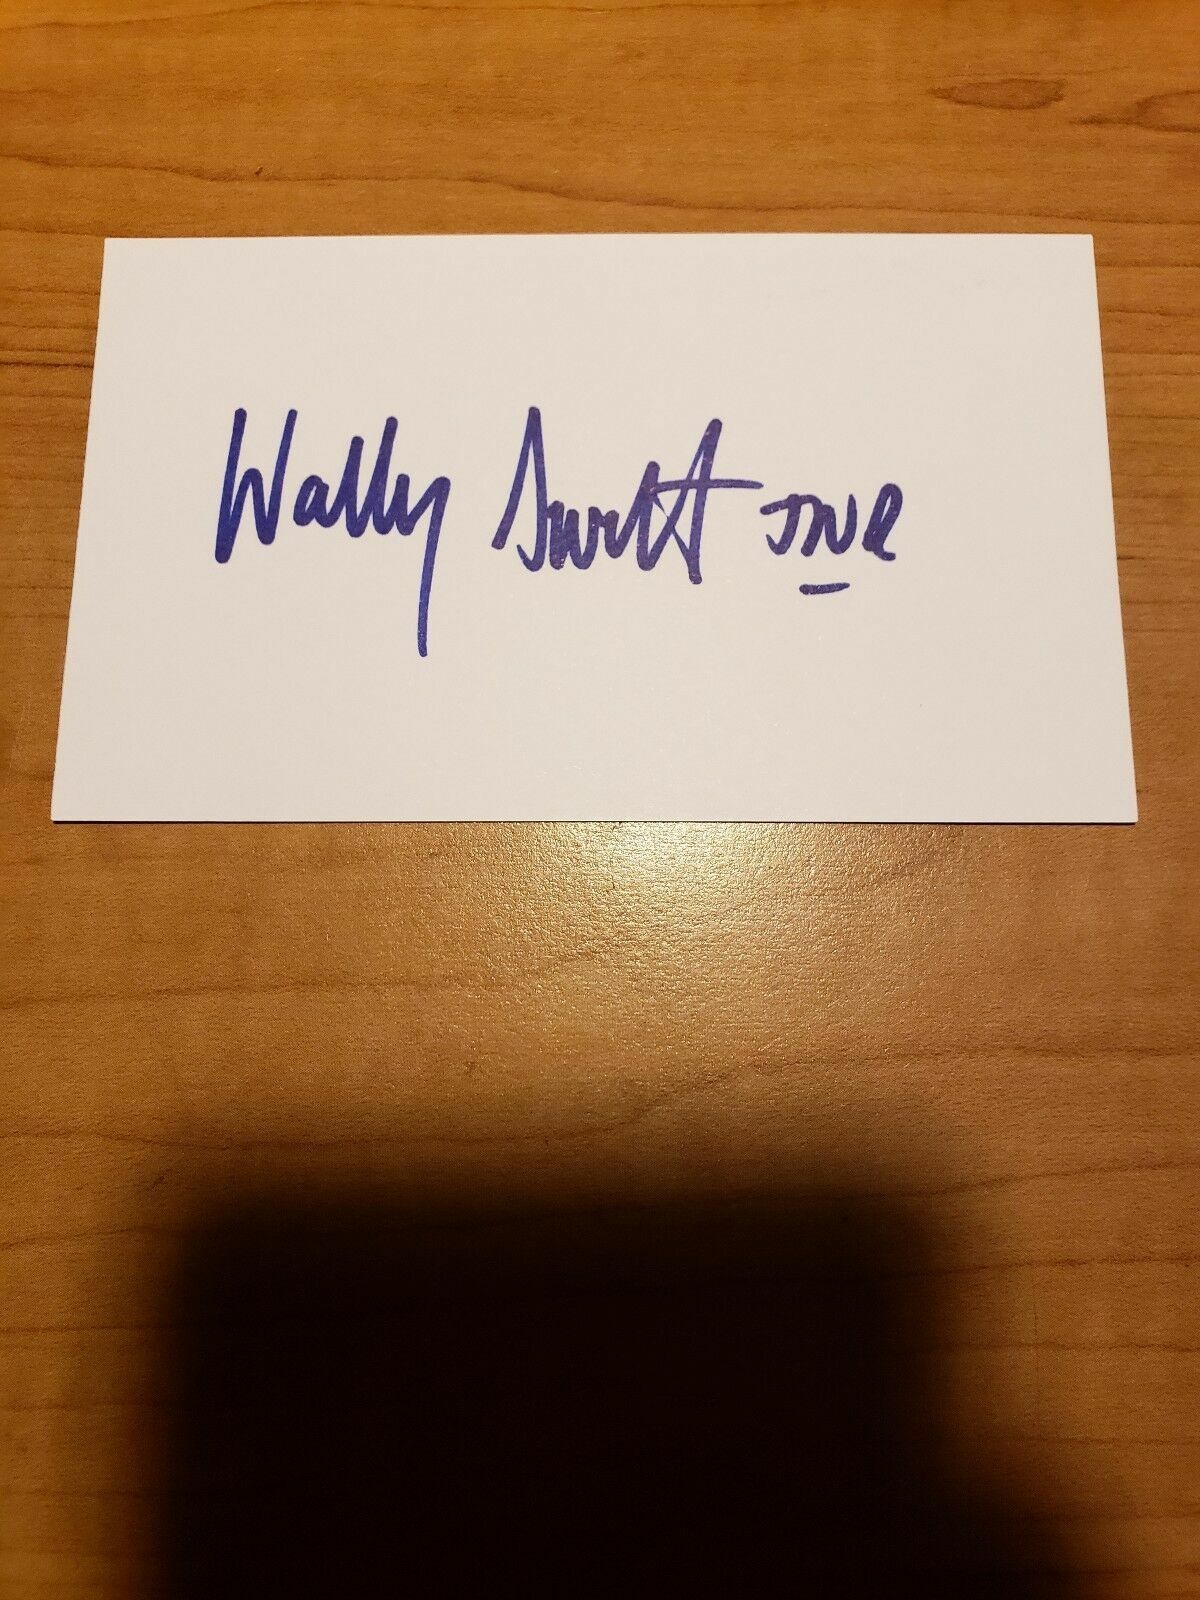 WALLY SWIFT JR - BOXER - AUTOGRAPH SIGNED - INDEX CARD -AUTHENTIC - A3821